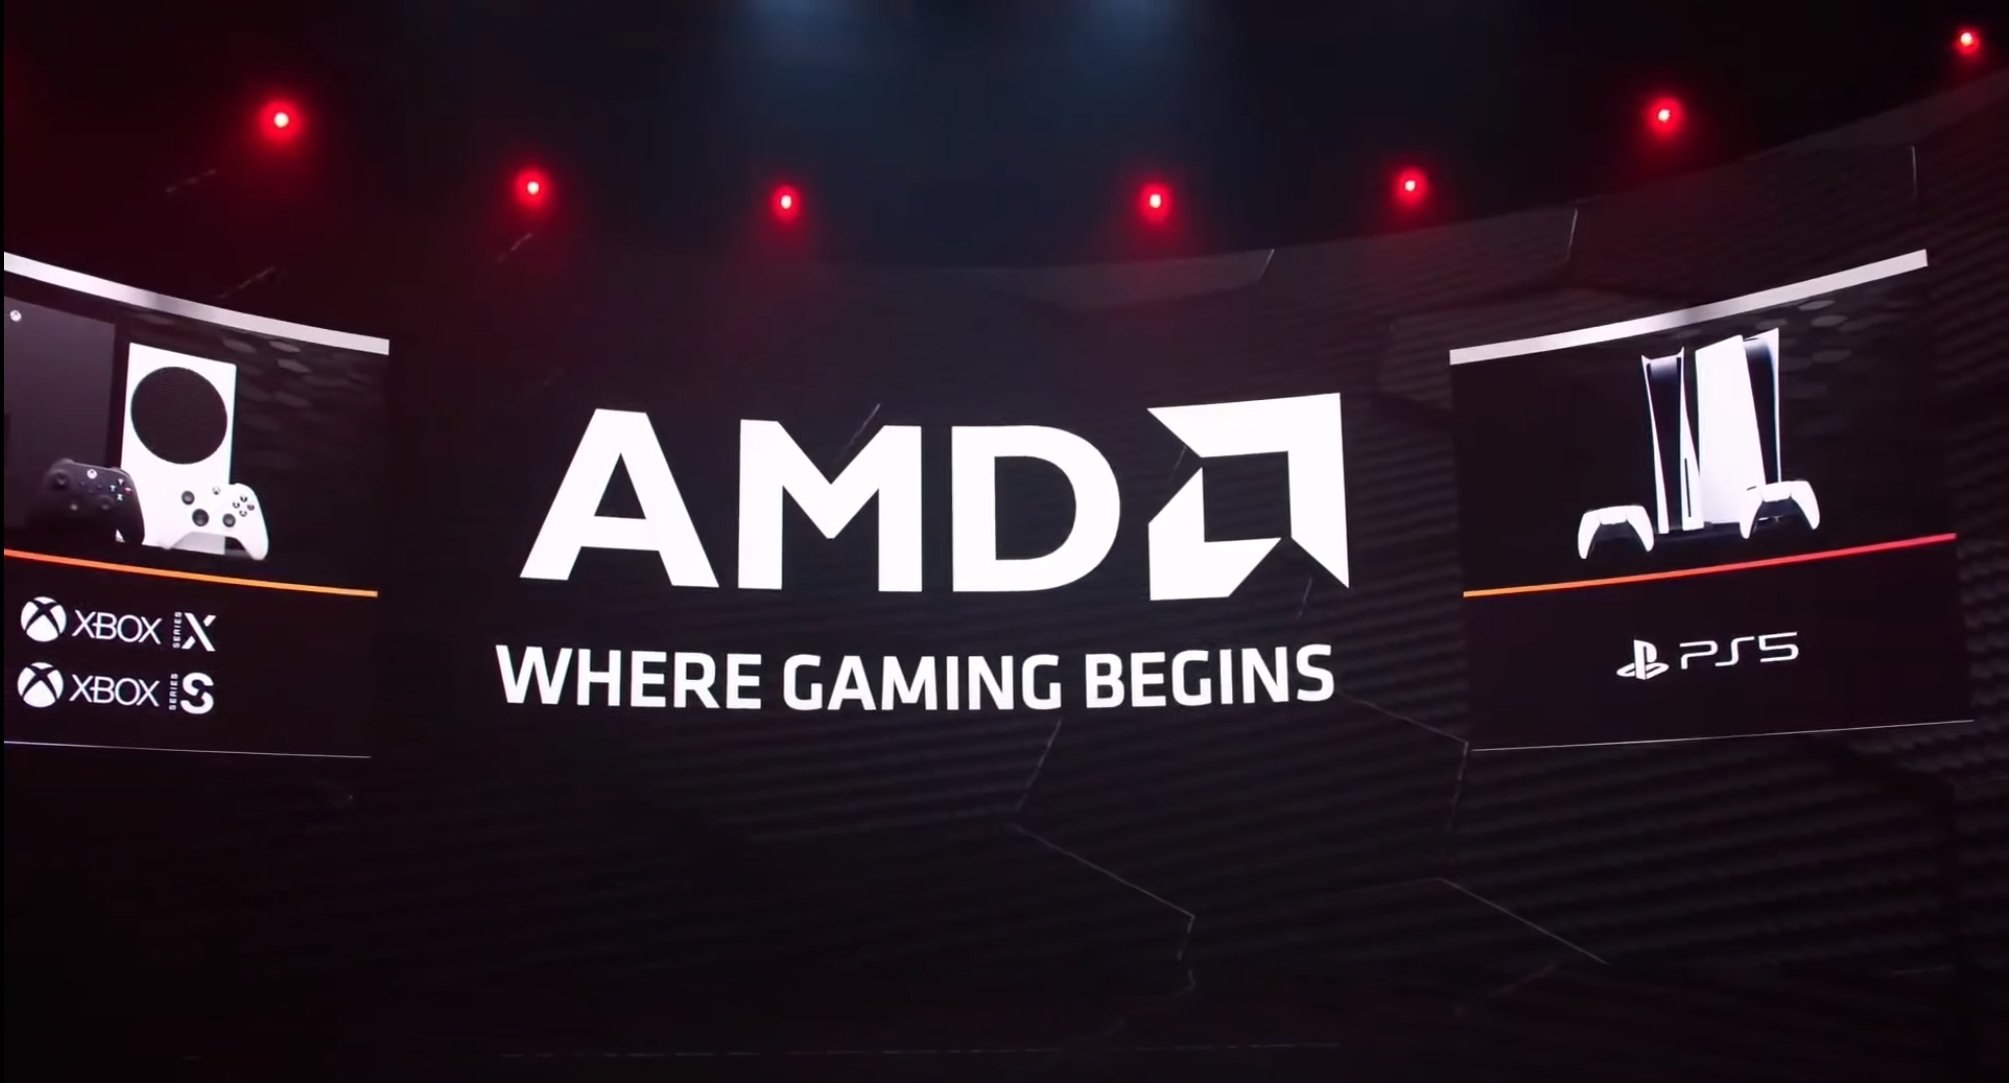 Will The Upcoming Release Of AMD’s 6000-Series GPUs Be Plagued With Stock Issues As Other Tech Releases Have Been This Quarter?